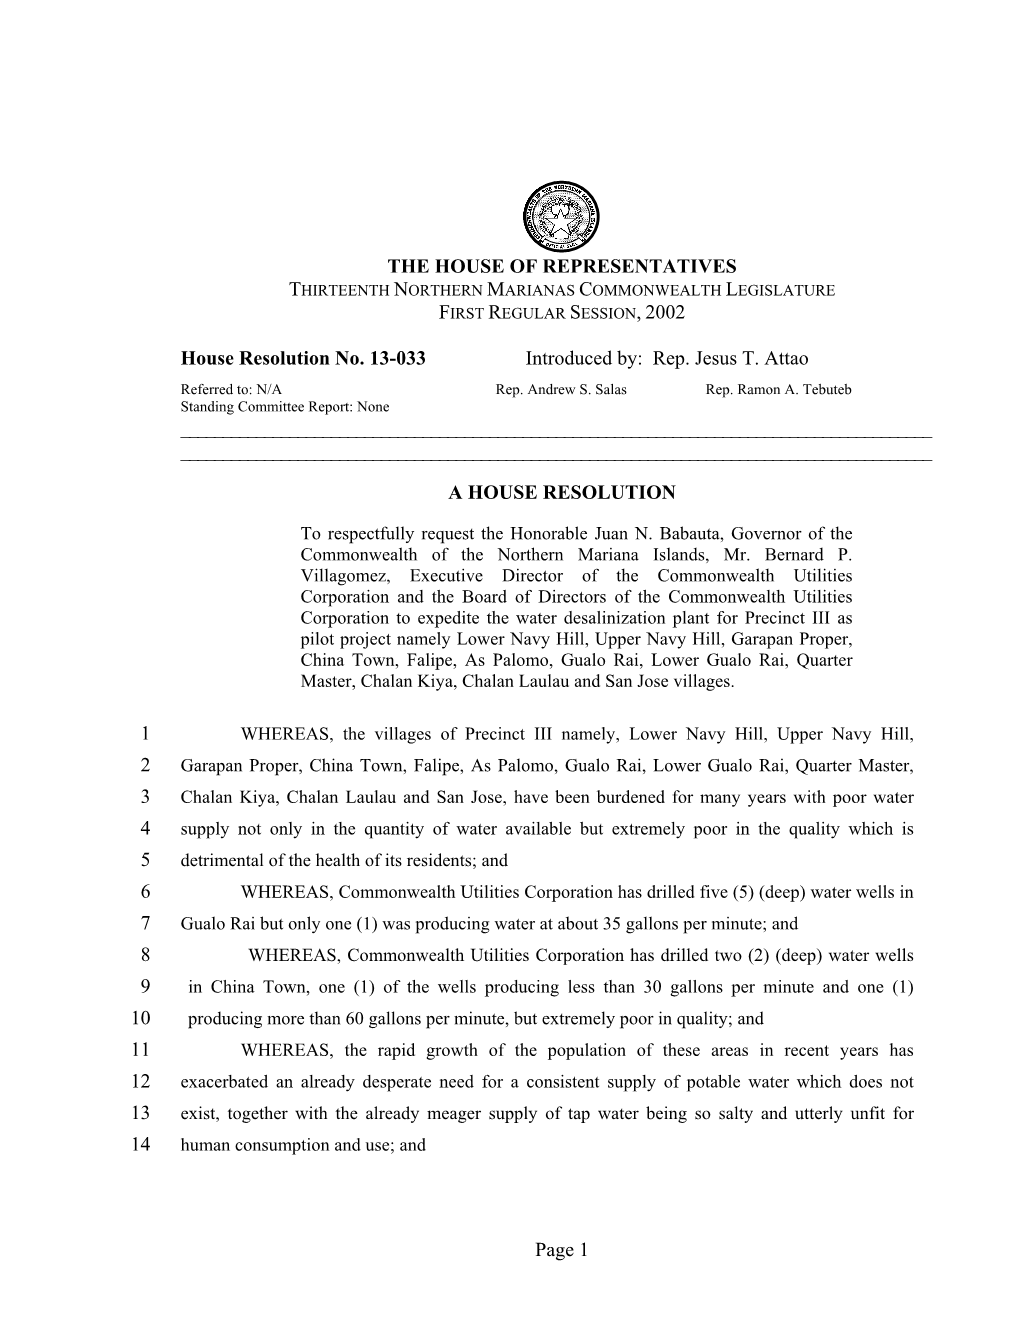 Page 1 the HOUSE of REPRESENTATIVES House Resolution No. 13-033 Introduced By